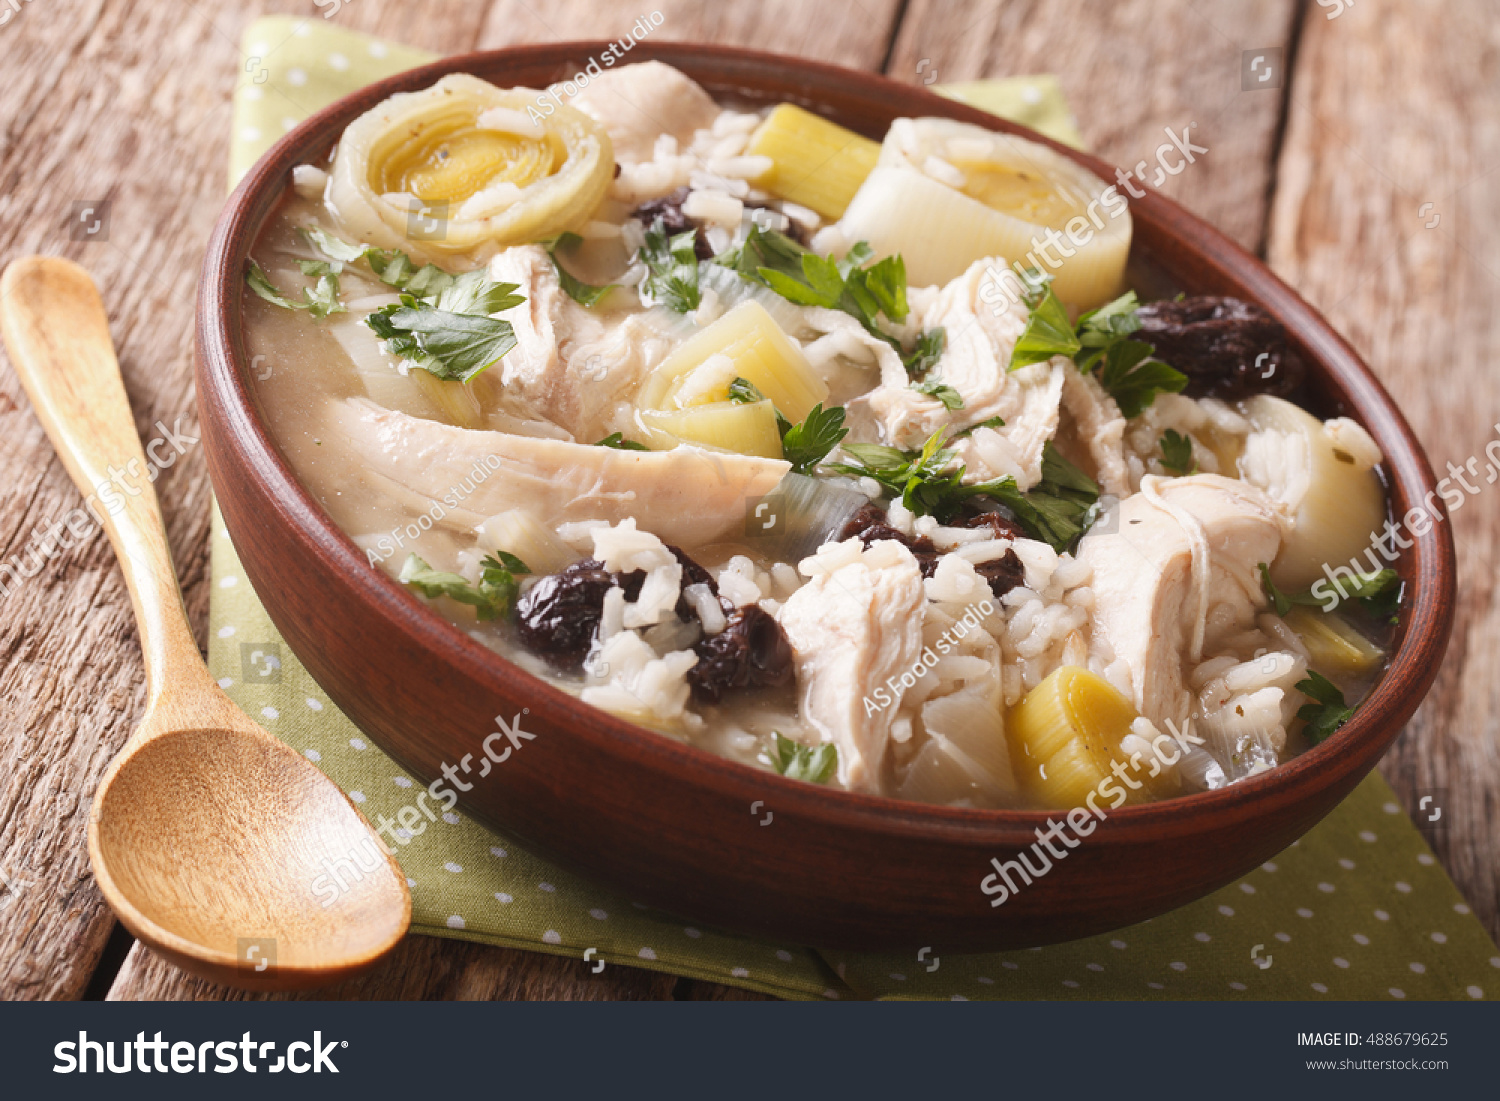 Scottish cock-a-leekie soup with leeks and prunes close up in a bowl on the table. horizontal
 #488679625